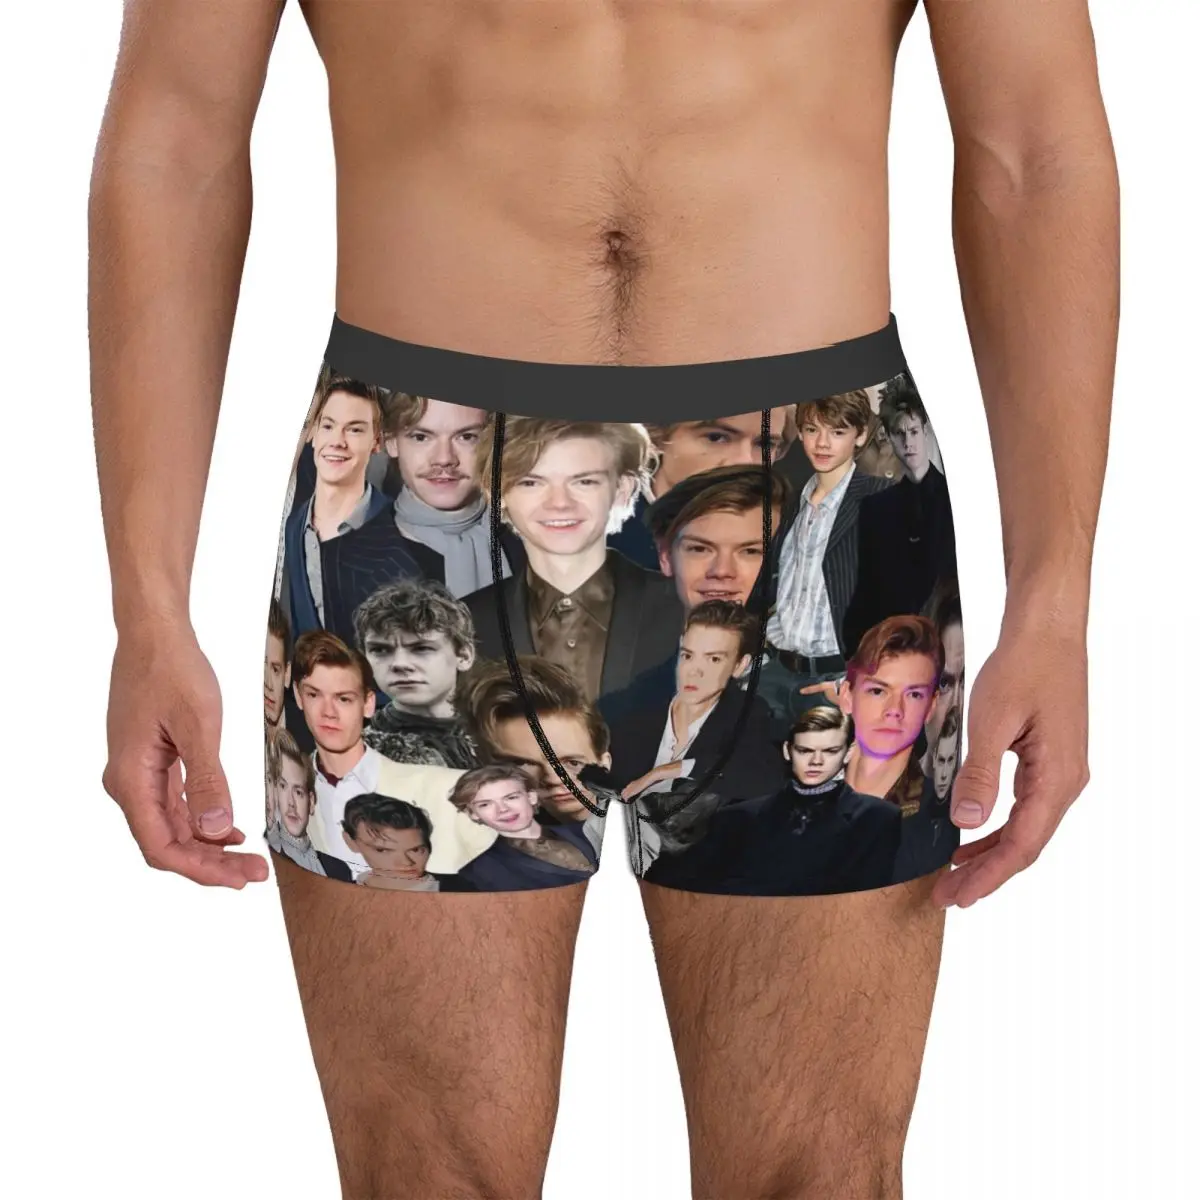 Thomas Brodie-sangster Collage Men's Boxer Briefs Shorts Men Underpants Cartoon Anime Funny Men's Panties Soft Underwear For Men mr paper 8 designs 2 pcs bag cartoon style semi sweet cheese series creative hand account diy decor collage material stickers